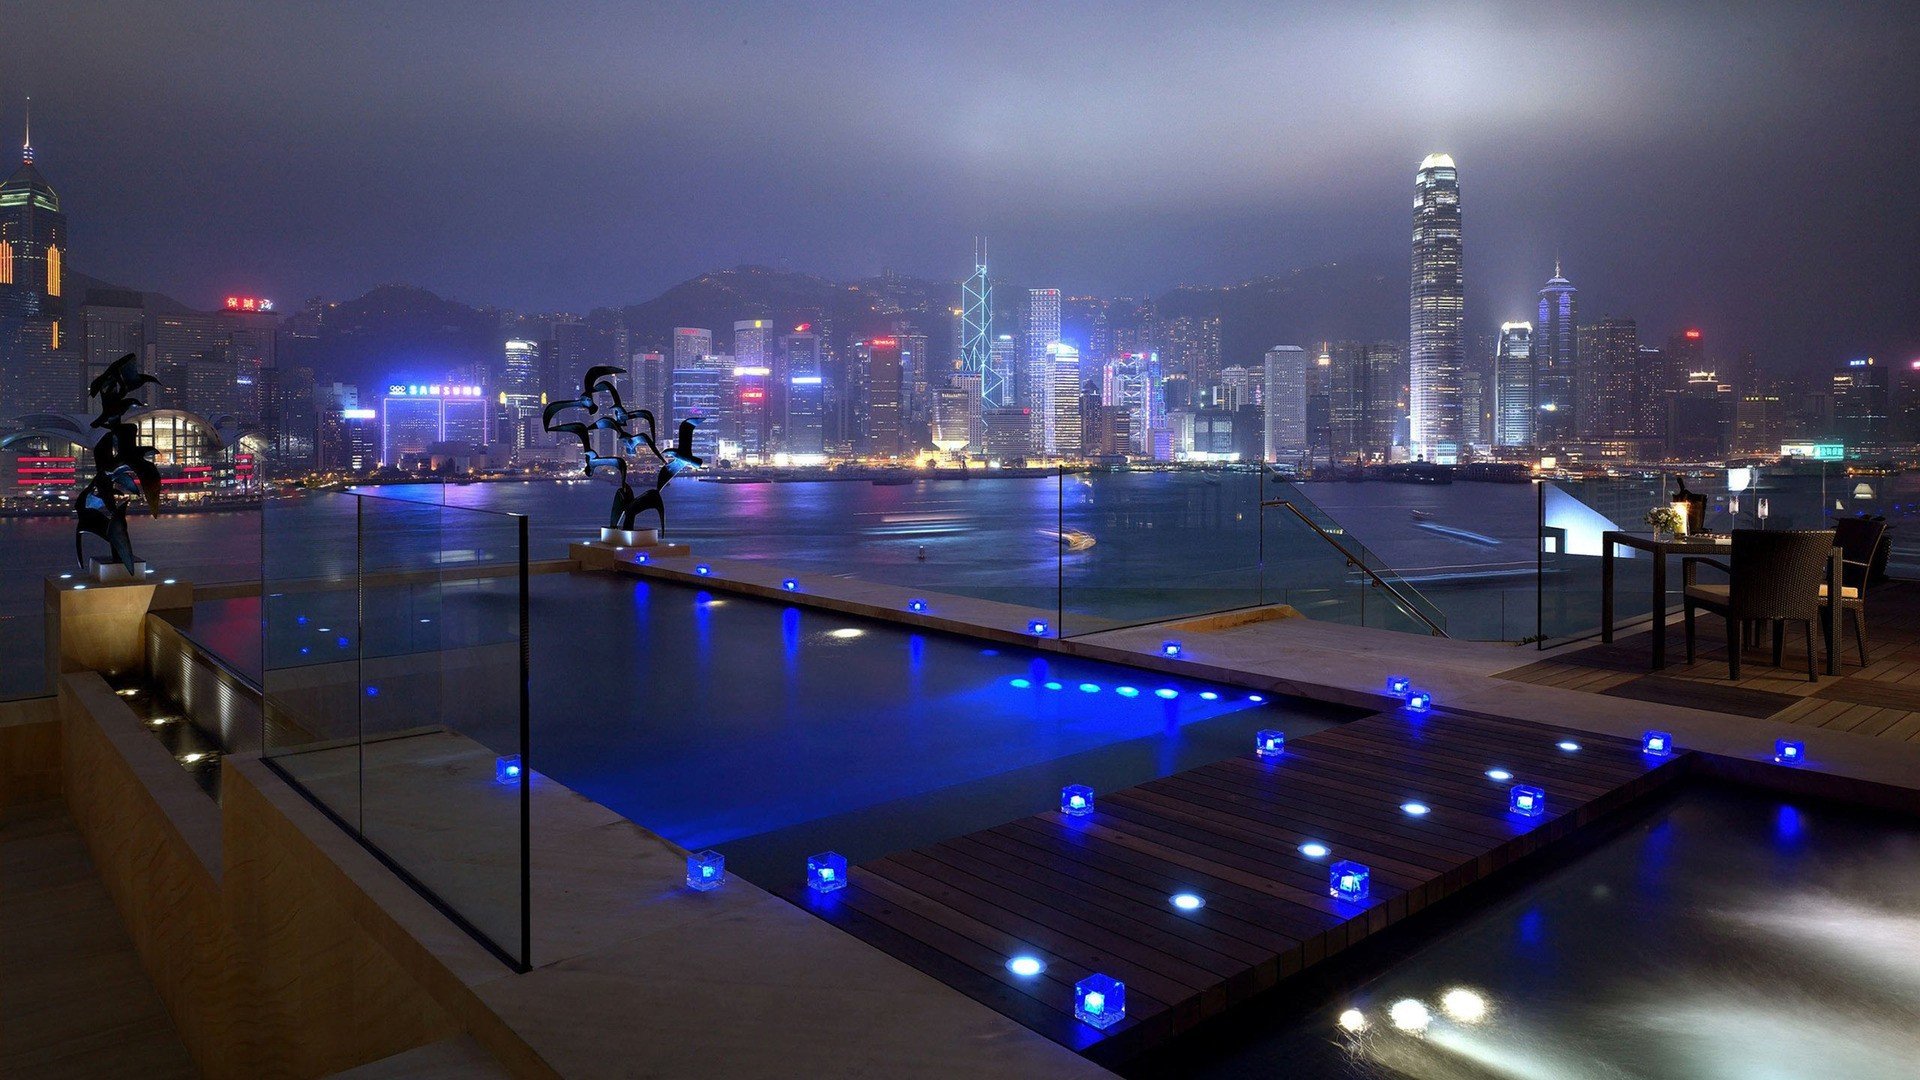 architecture, Night, Lights, Cityscape, Long exposure, Swimming pool